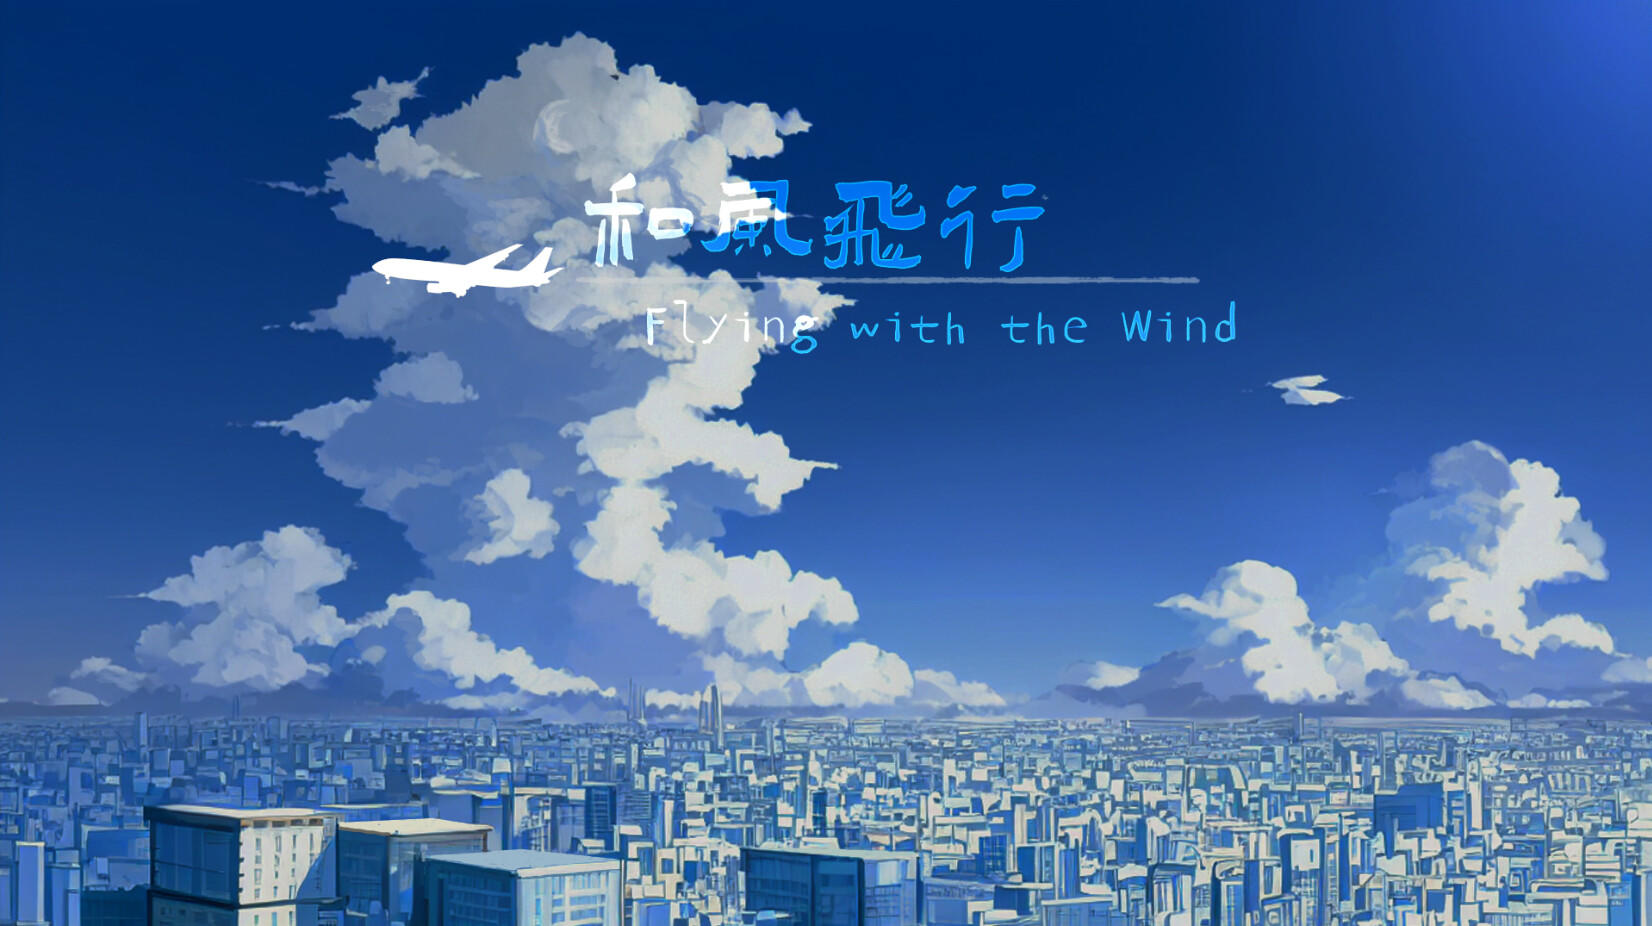 Screenshot 1 of 和風飛行Flying with the wind 